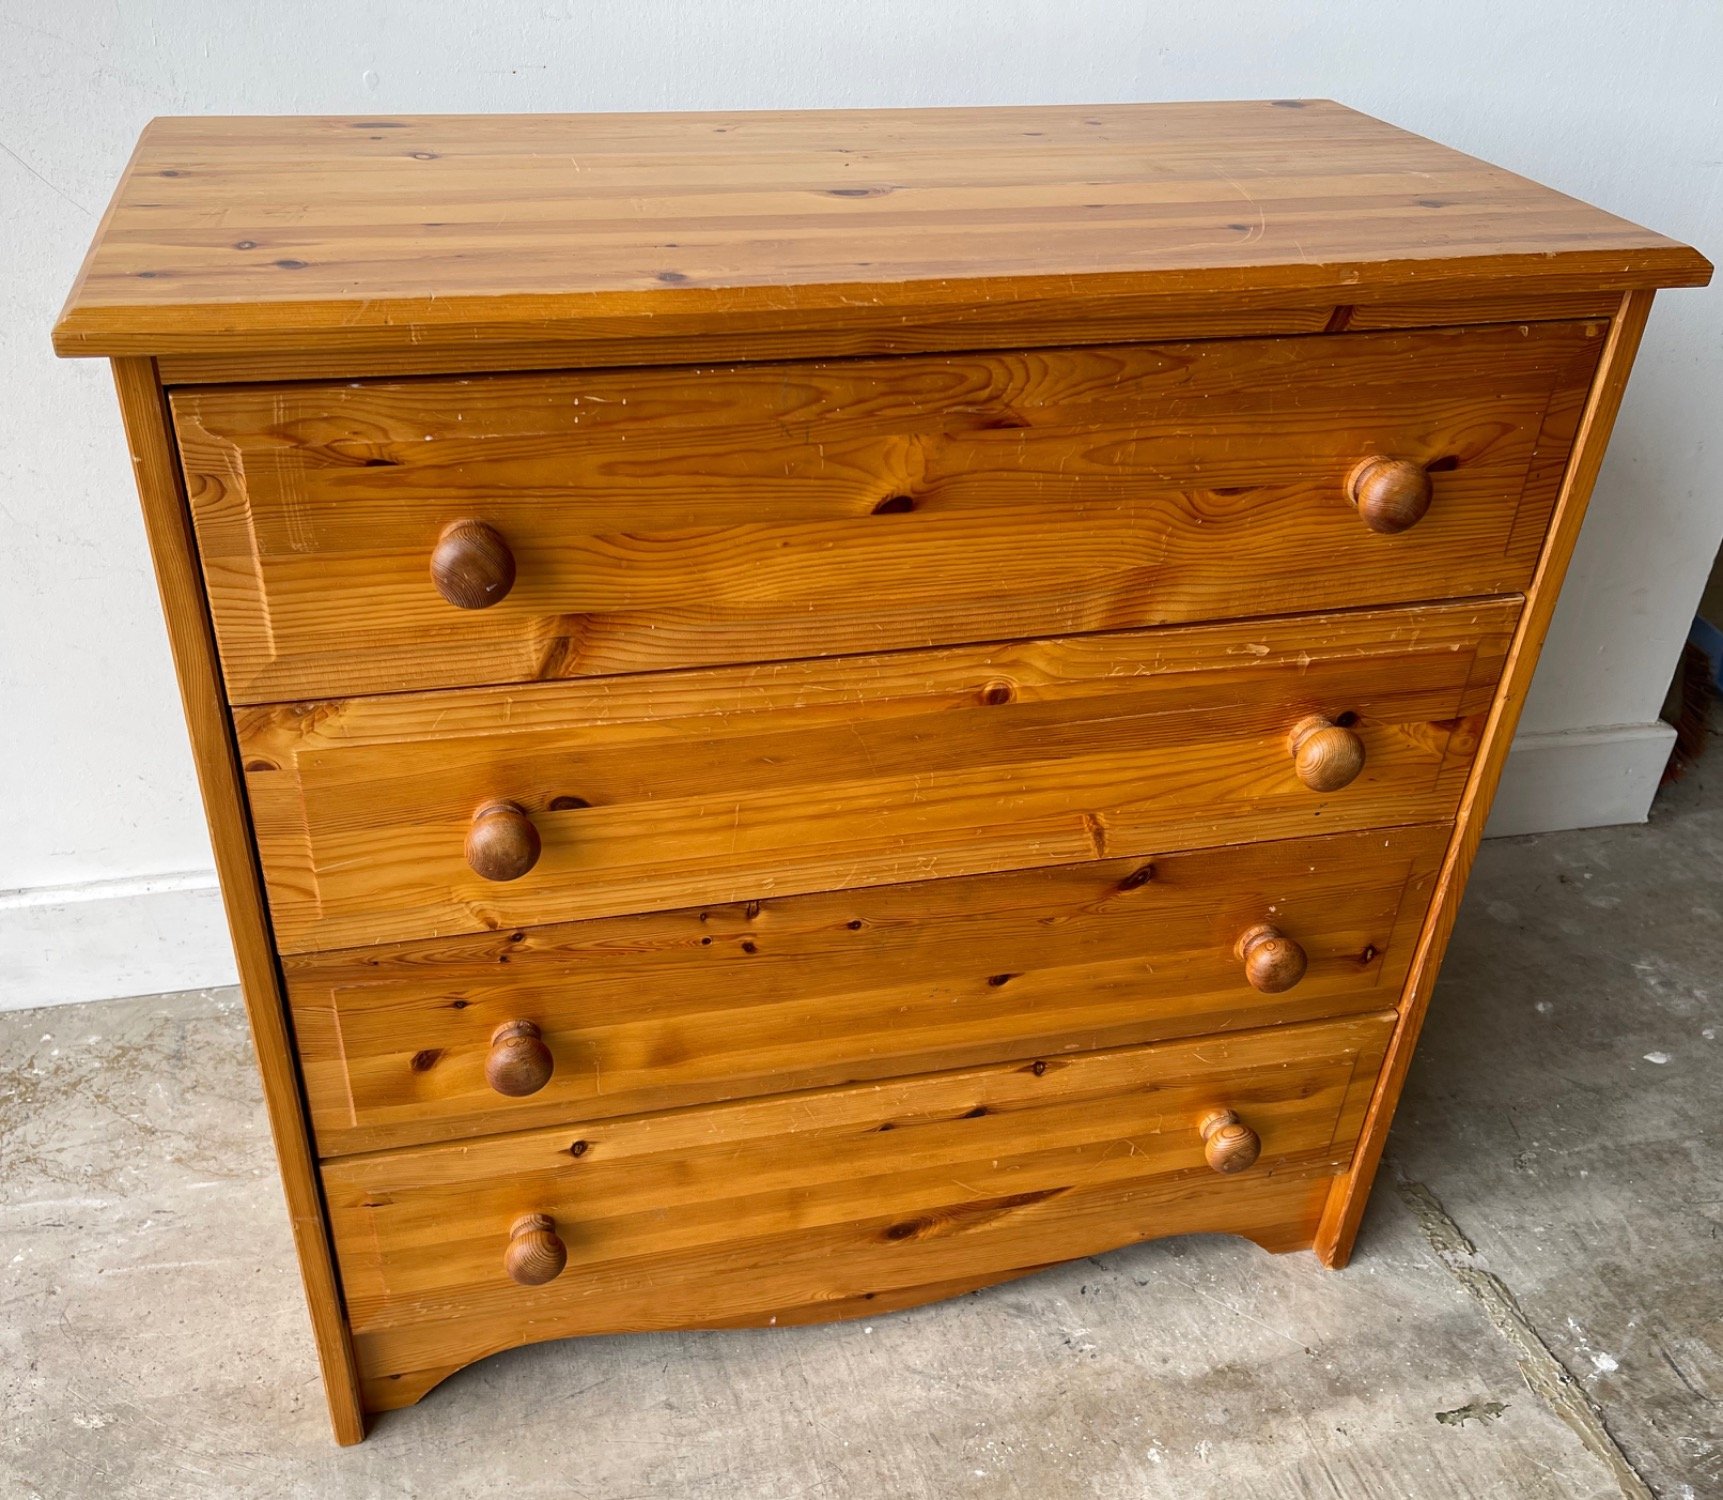 CUTE! A pine bedroom 4 drawer chest of drawers - 2.5ft tall x 18" depth x 2.5ft depth approx